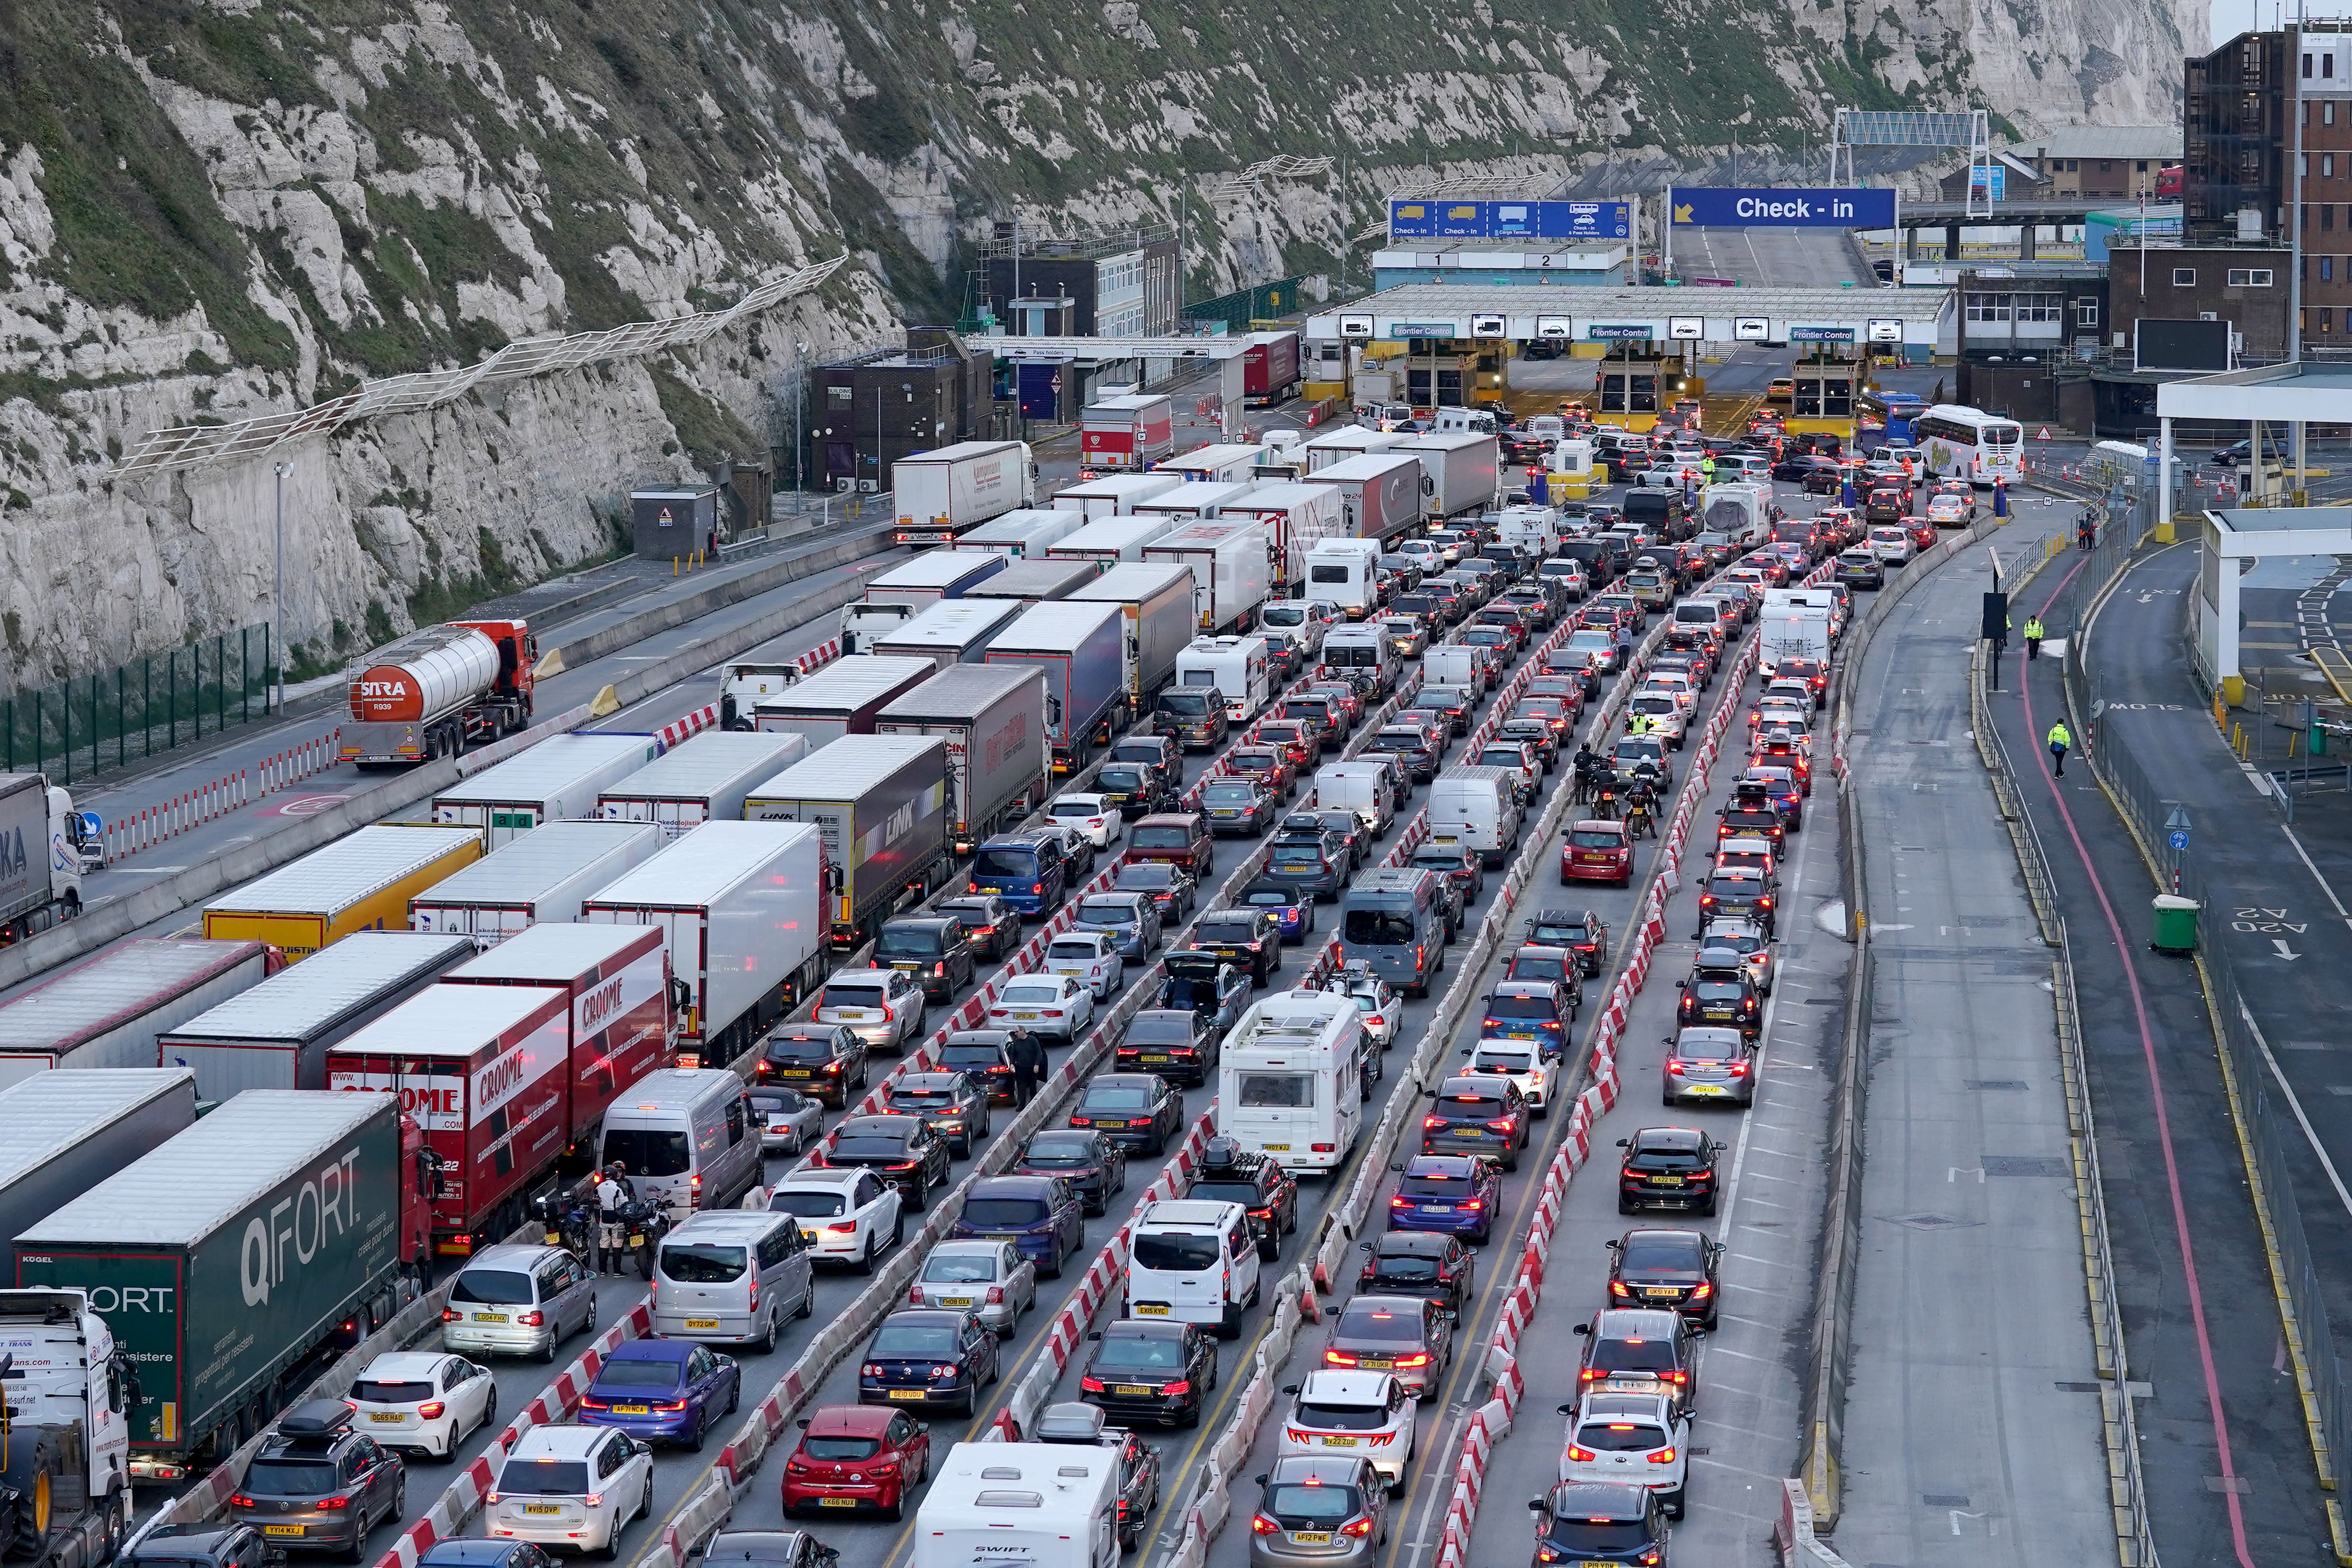 Holidaymakers heading to the continent over Easter faced huge queues